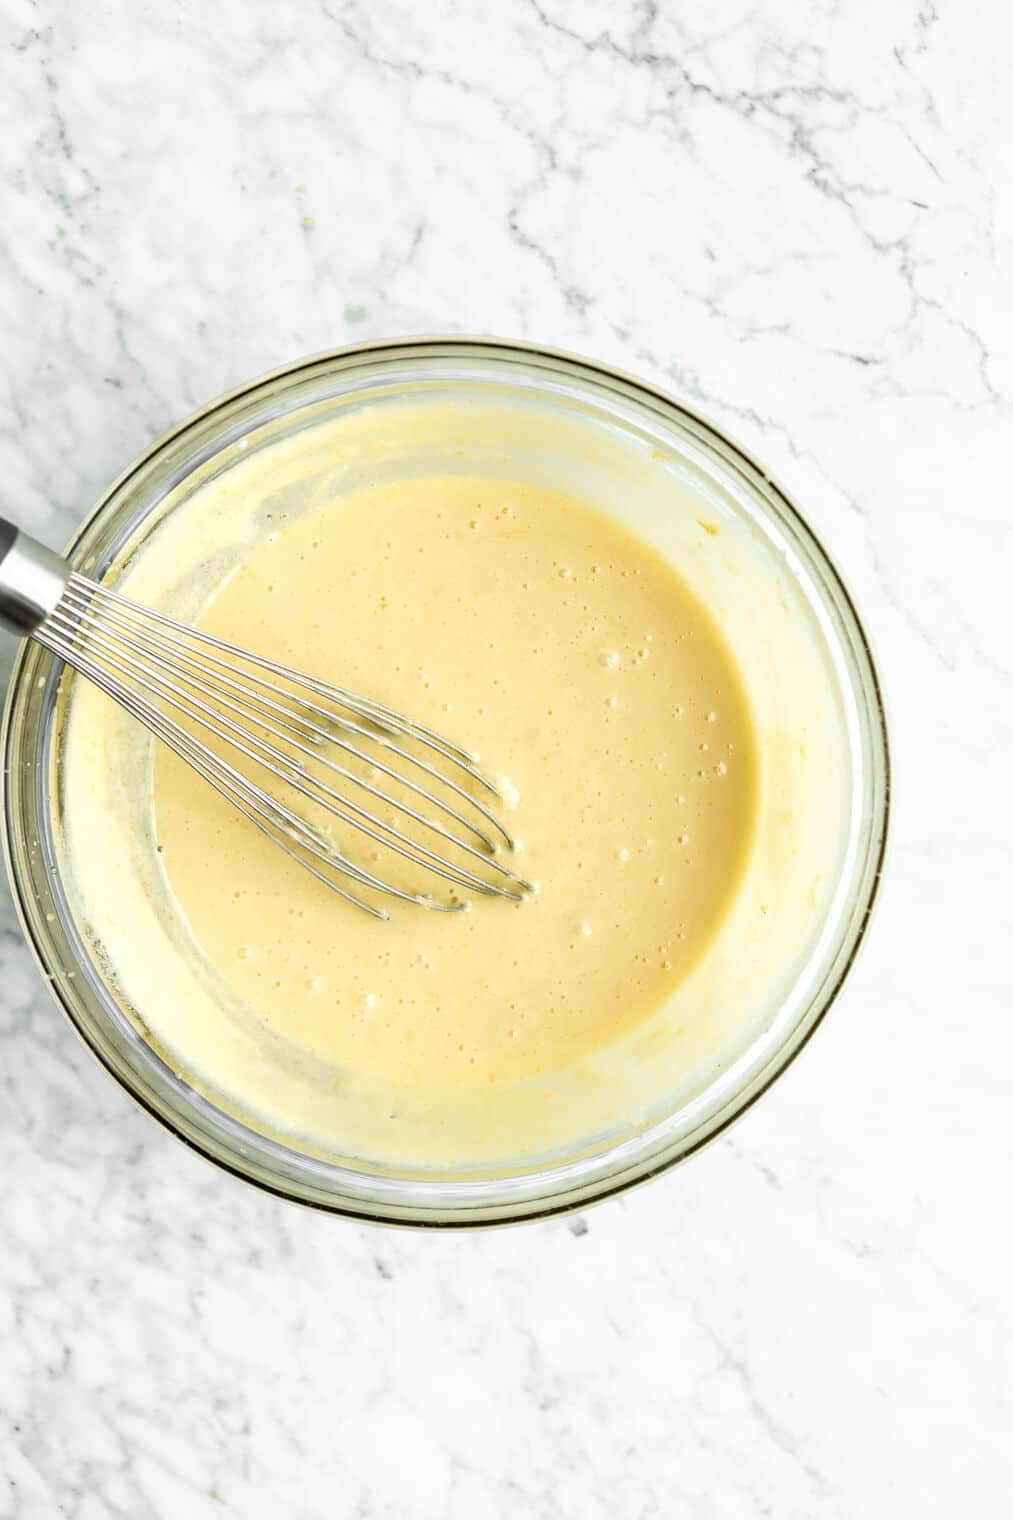 Lemon curd in glass bowl with a whisk.